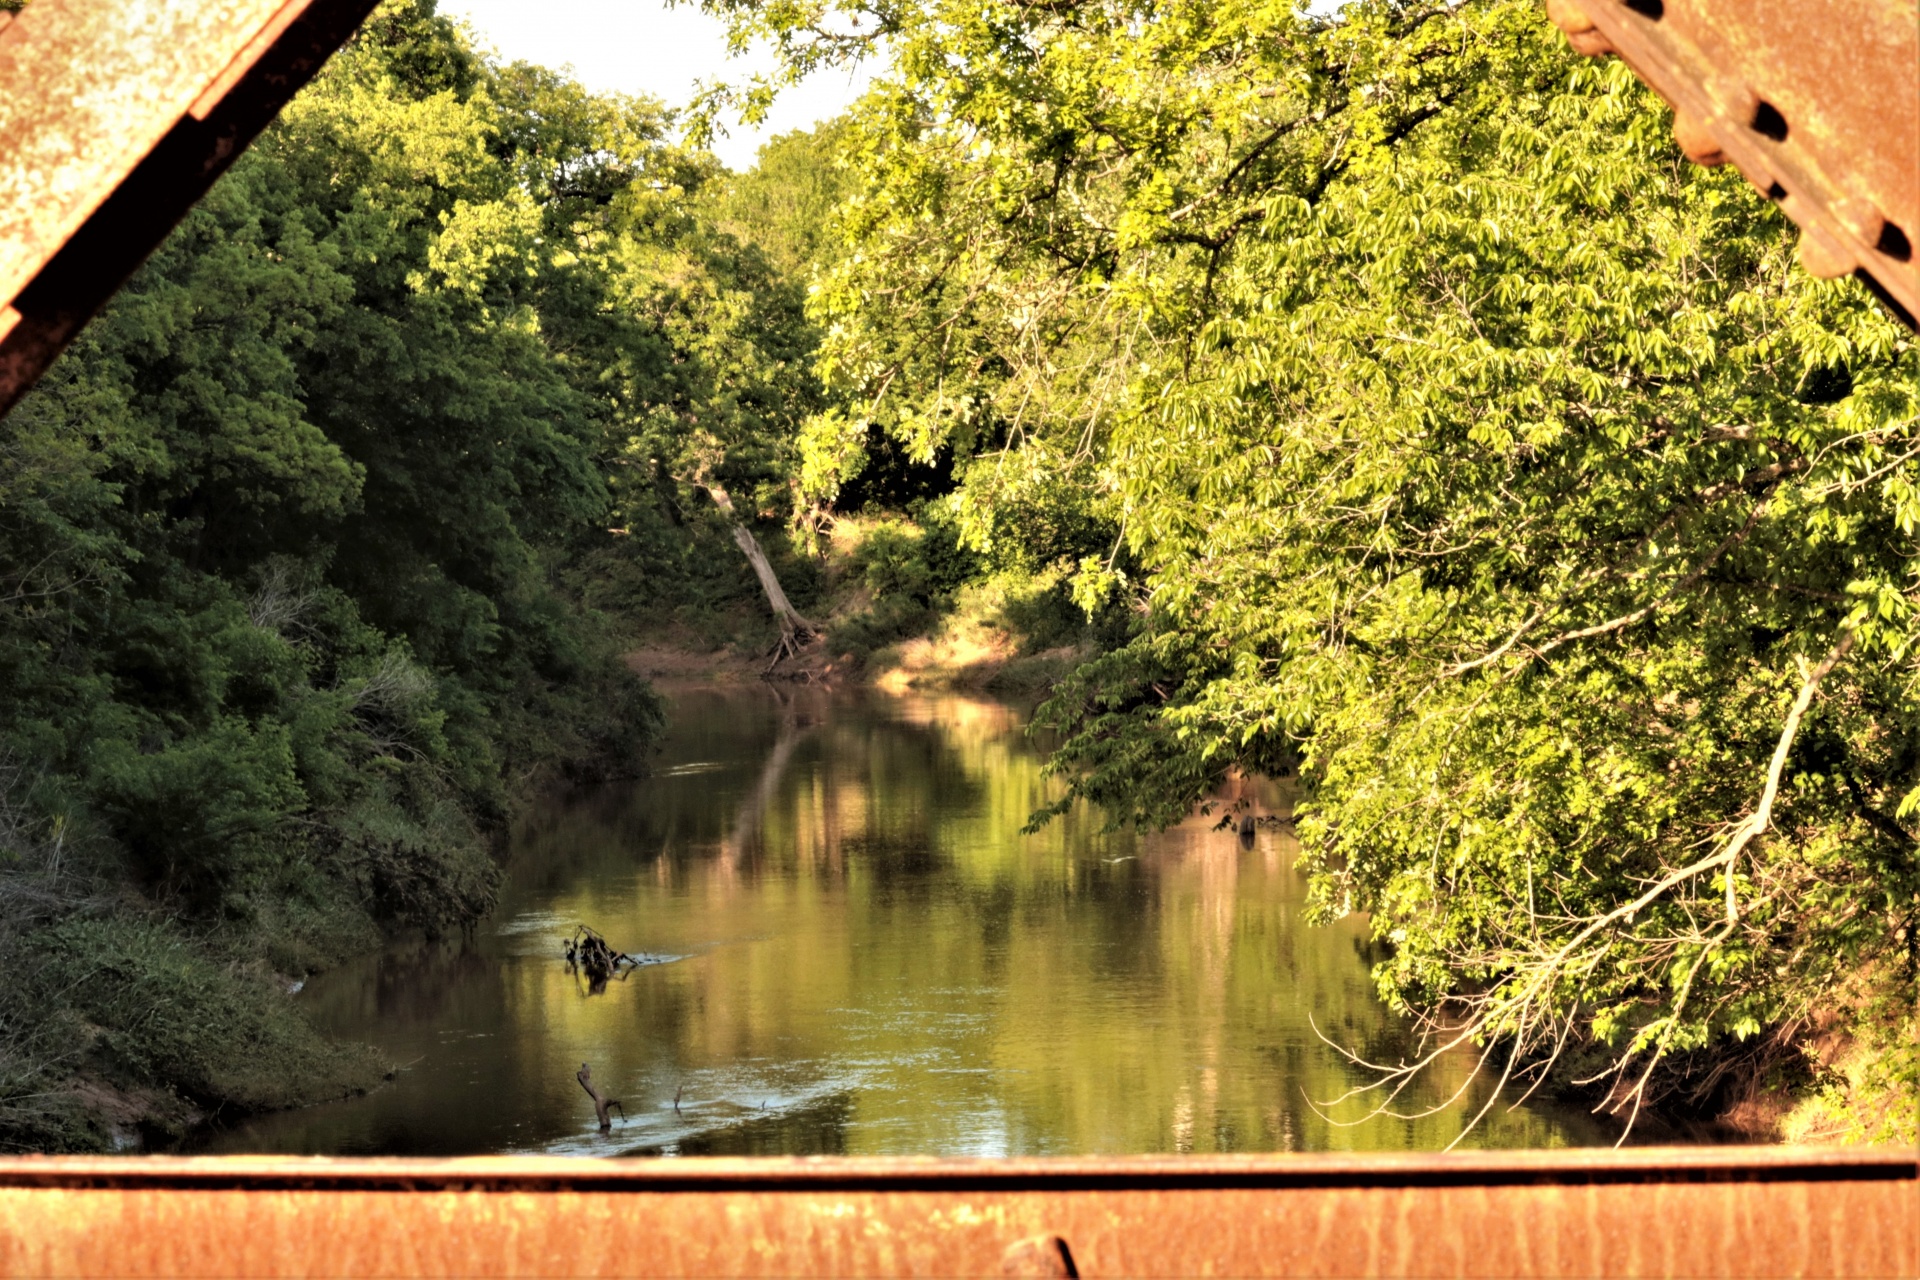 The view of a shimmering creek as it flows through green summer trees, as seen through the trusses of an old rusty bridge, in summer.